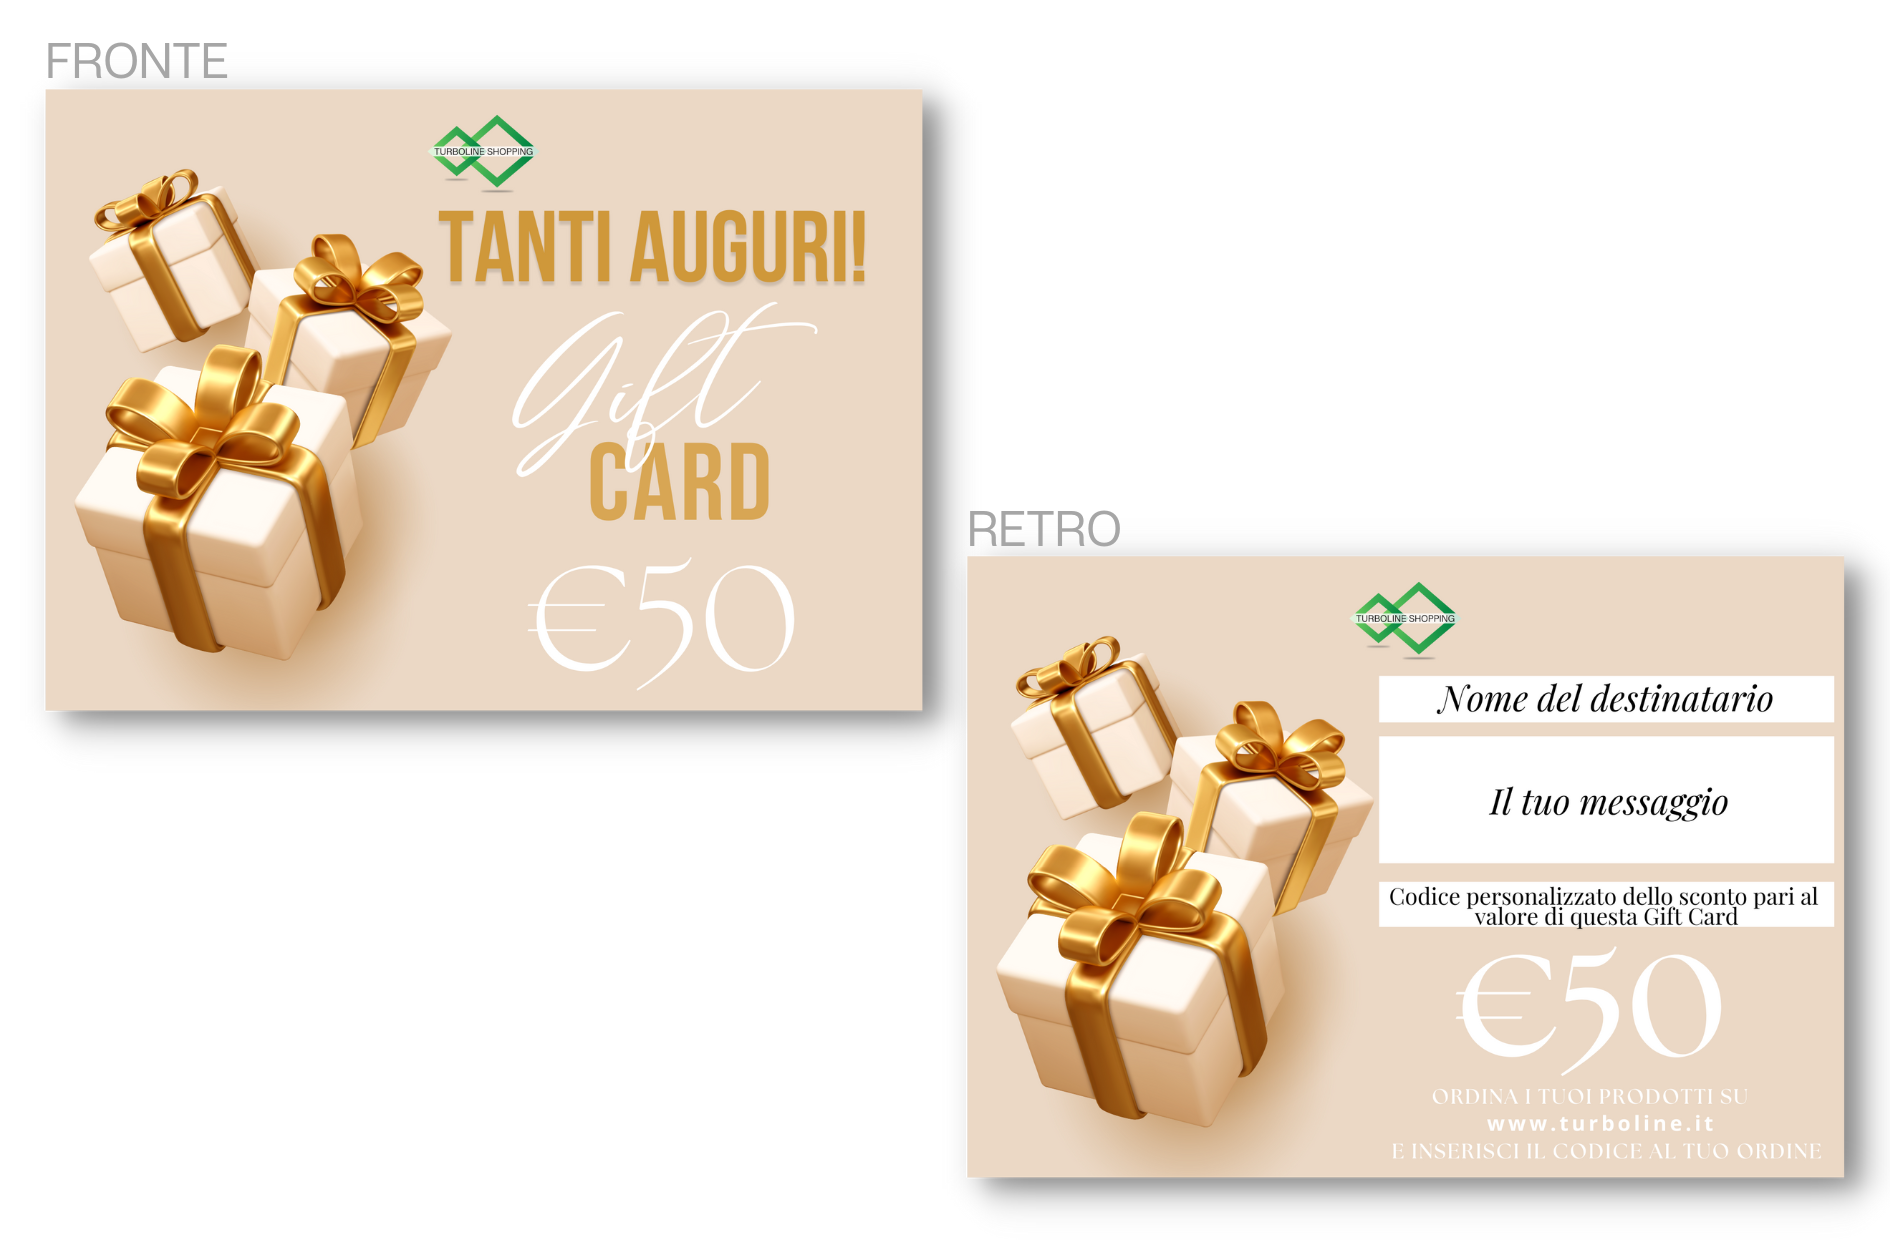 Gift Card Valore €50, €100, €200